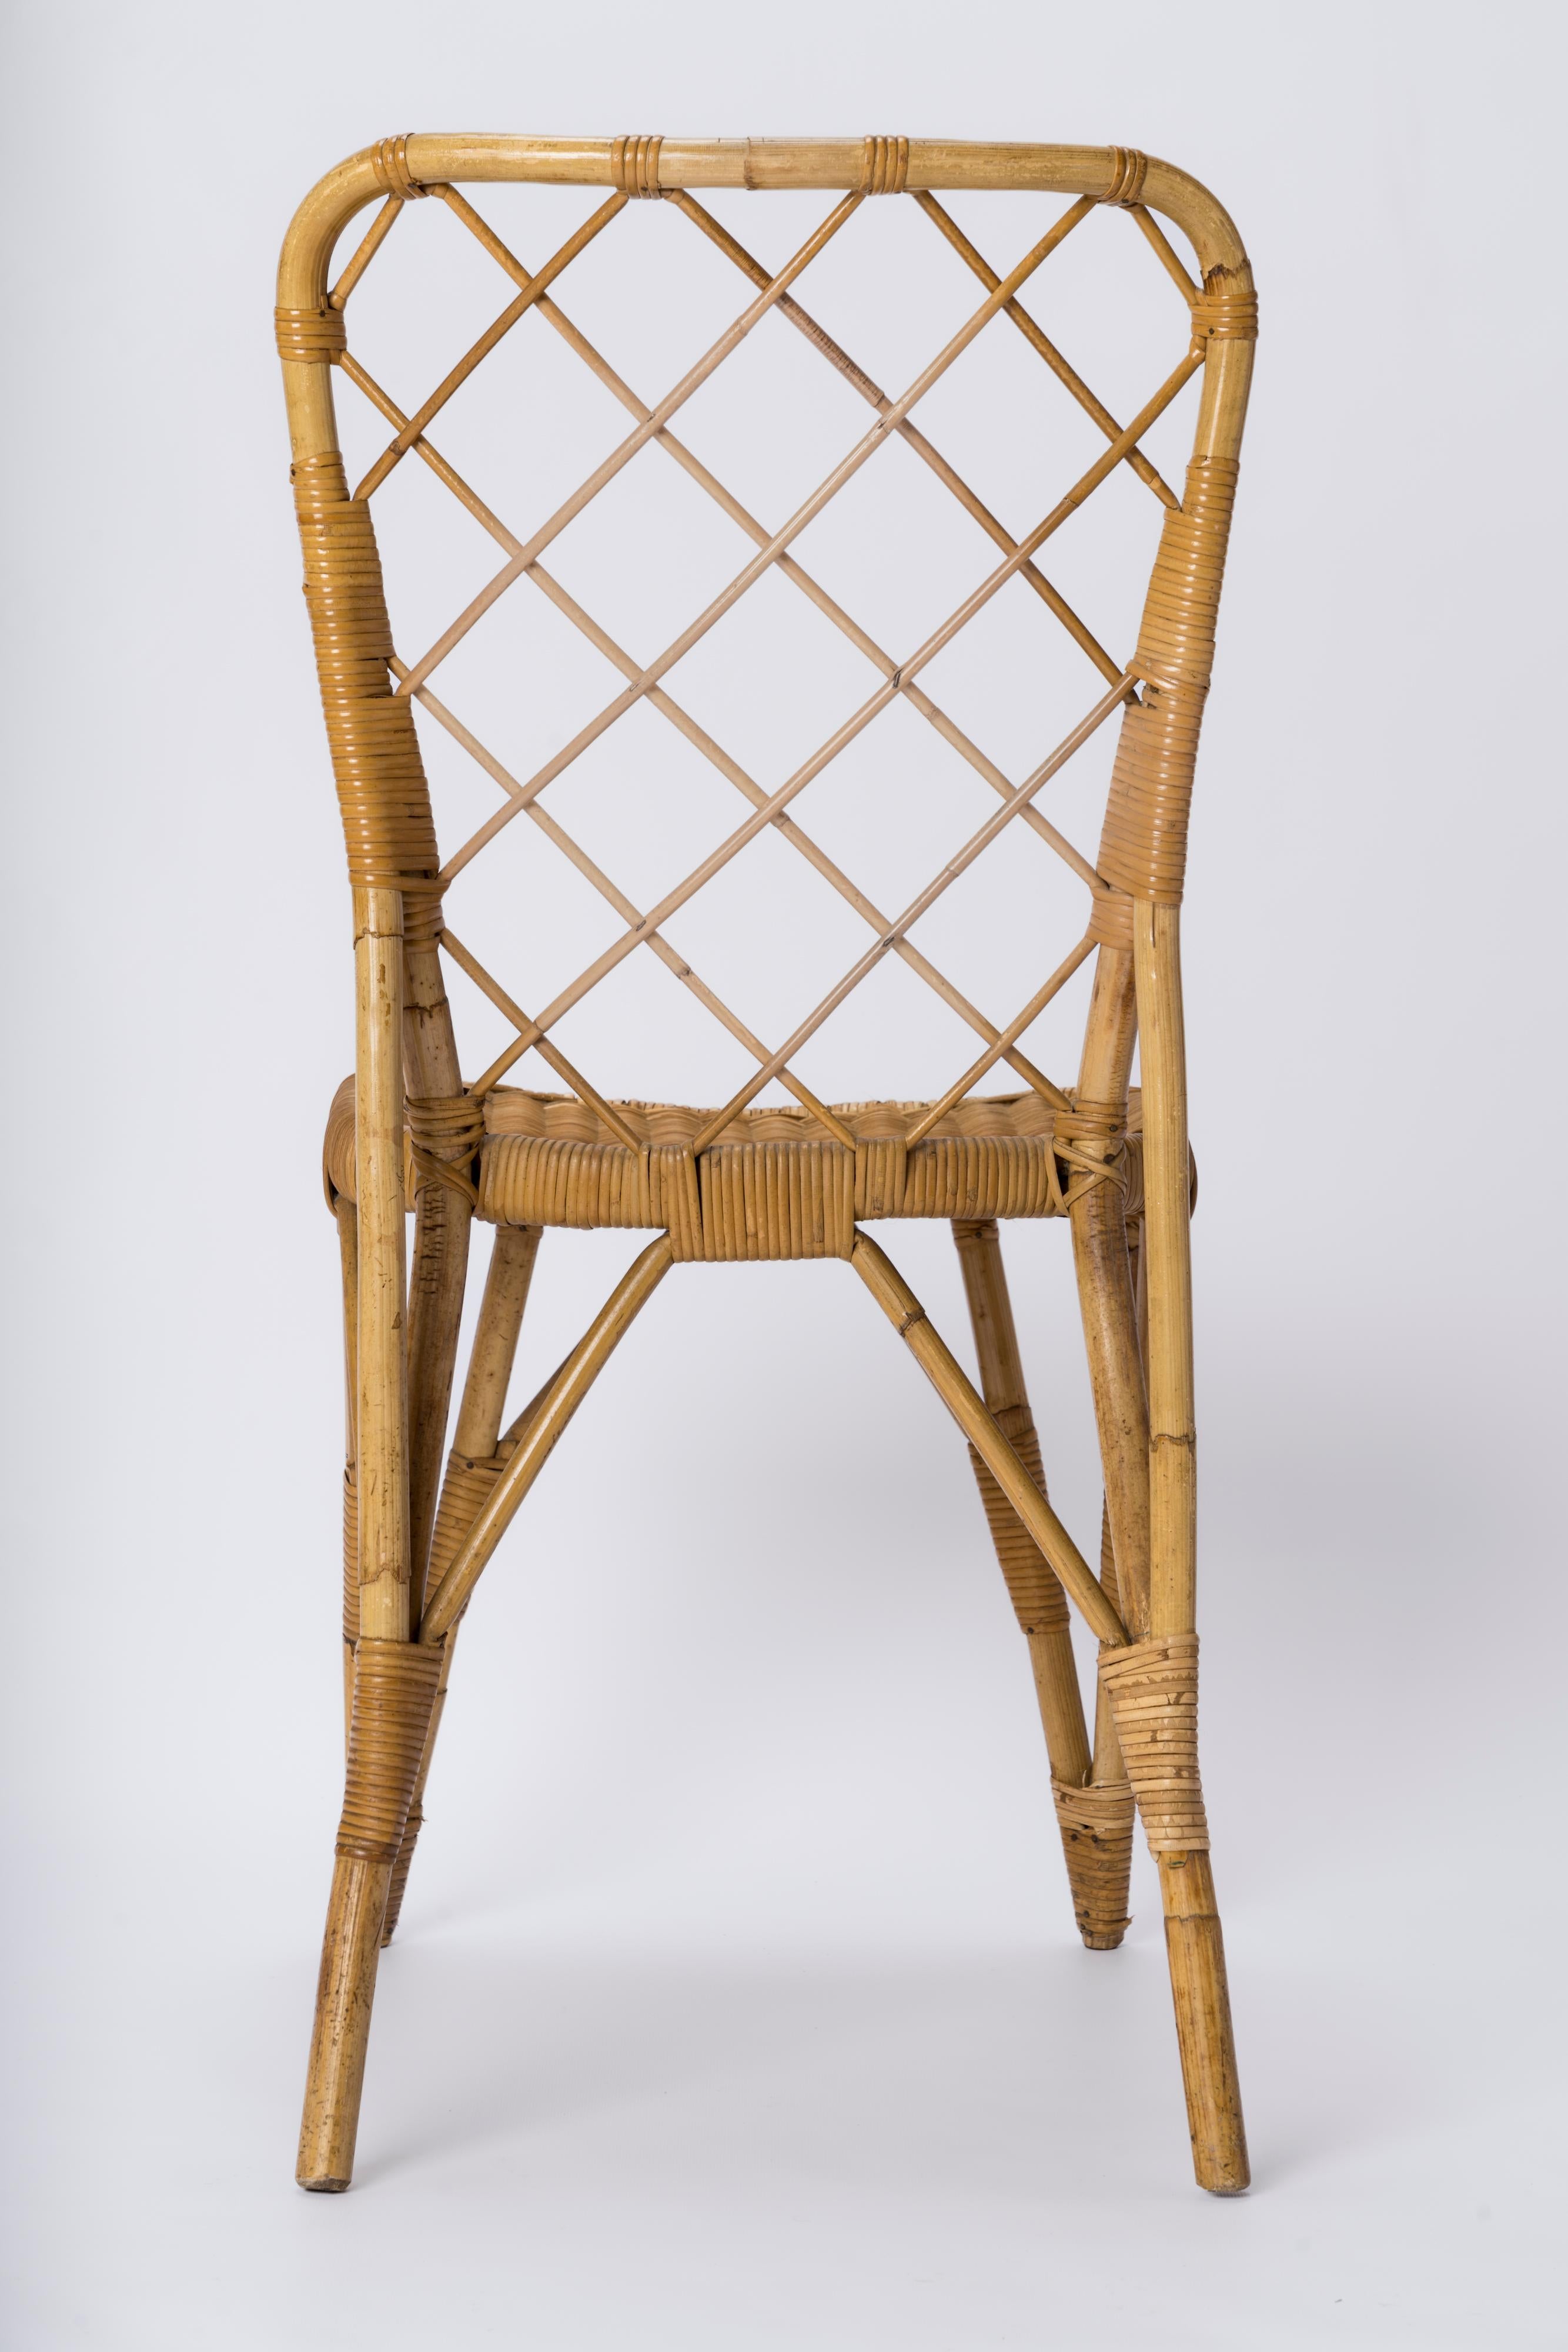 Wicker Rattan Chair with Braided Back in the style of Louis Sognot - France 1960's For Sale